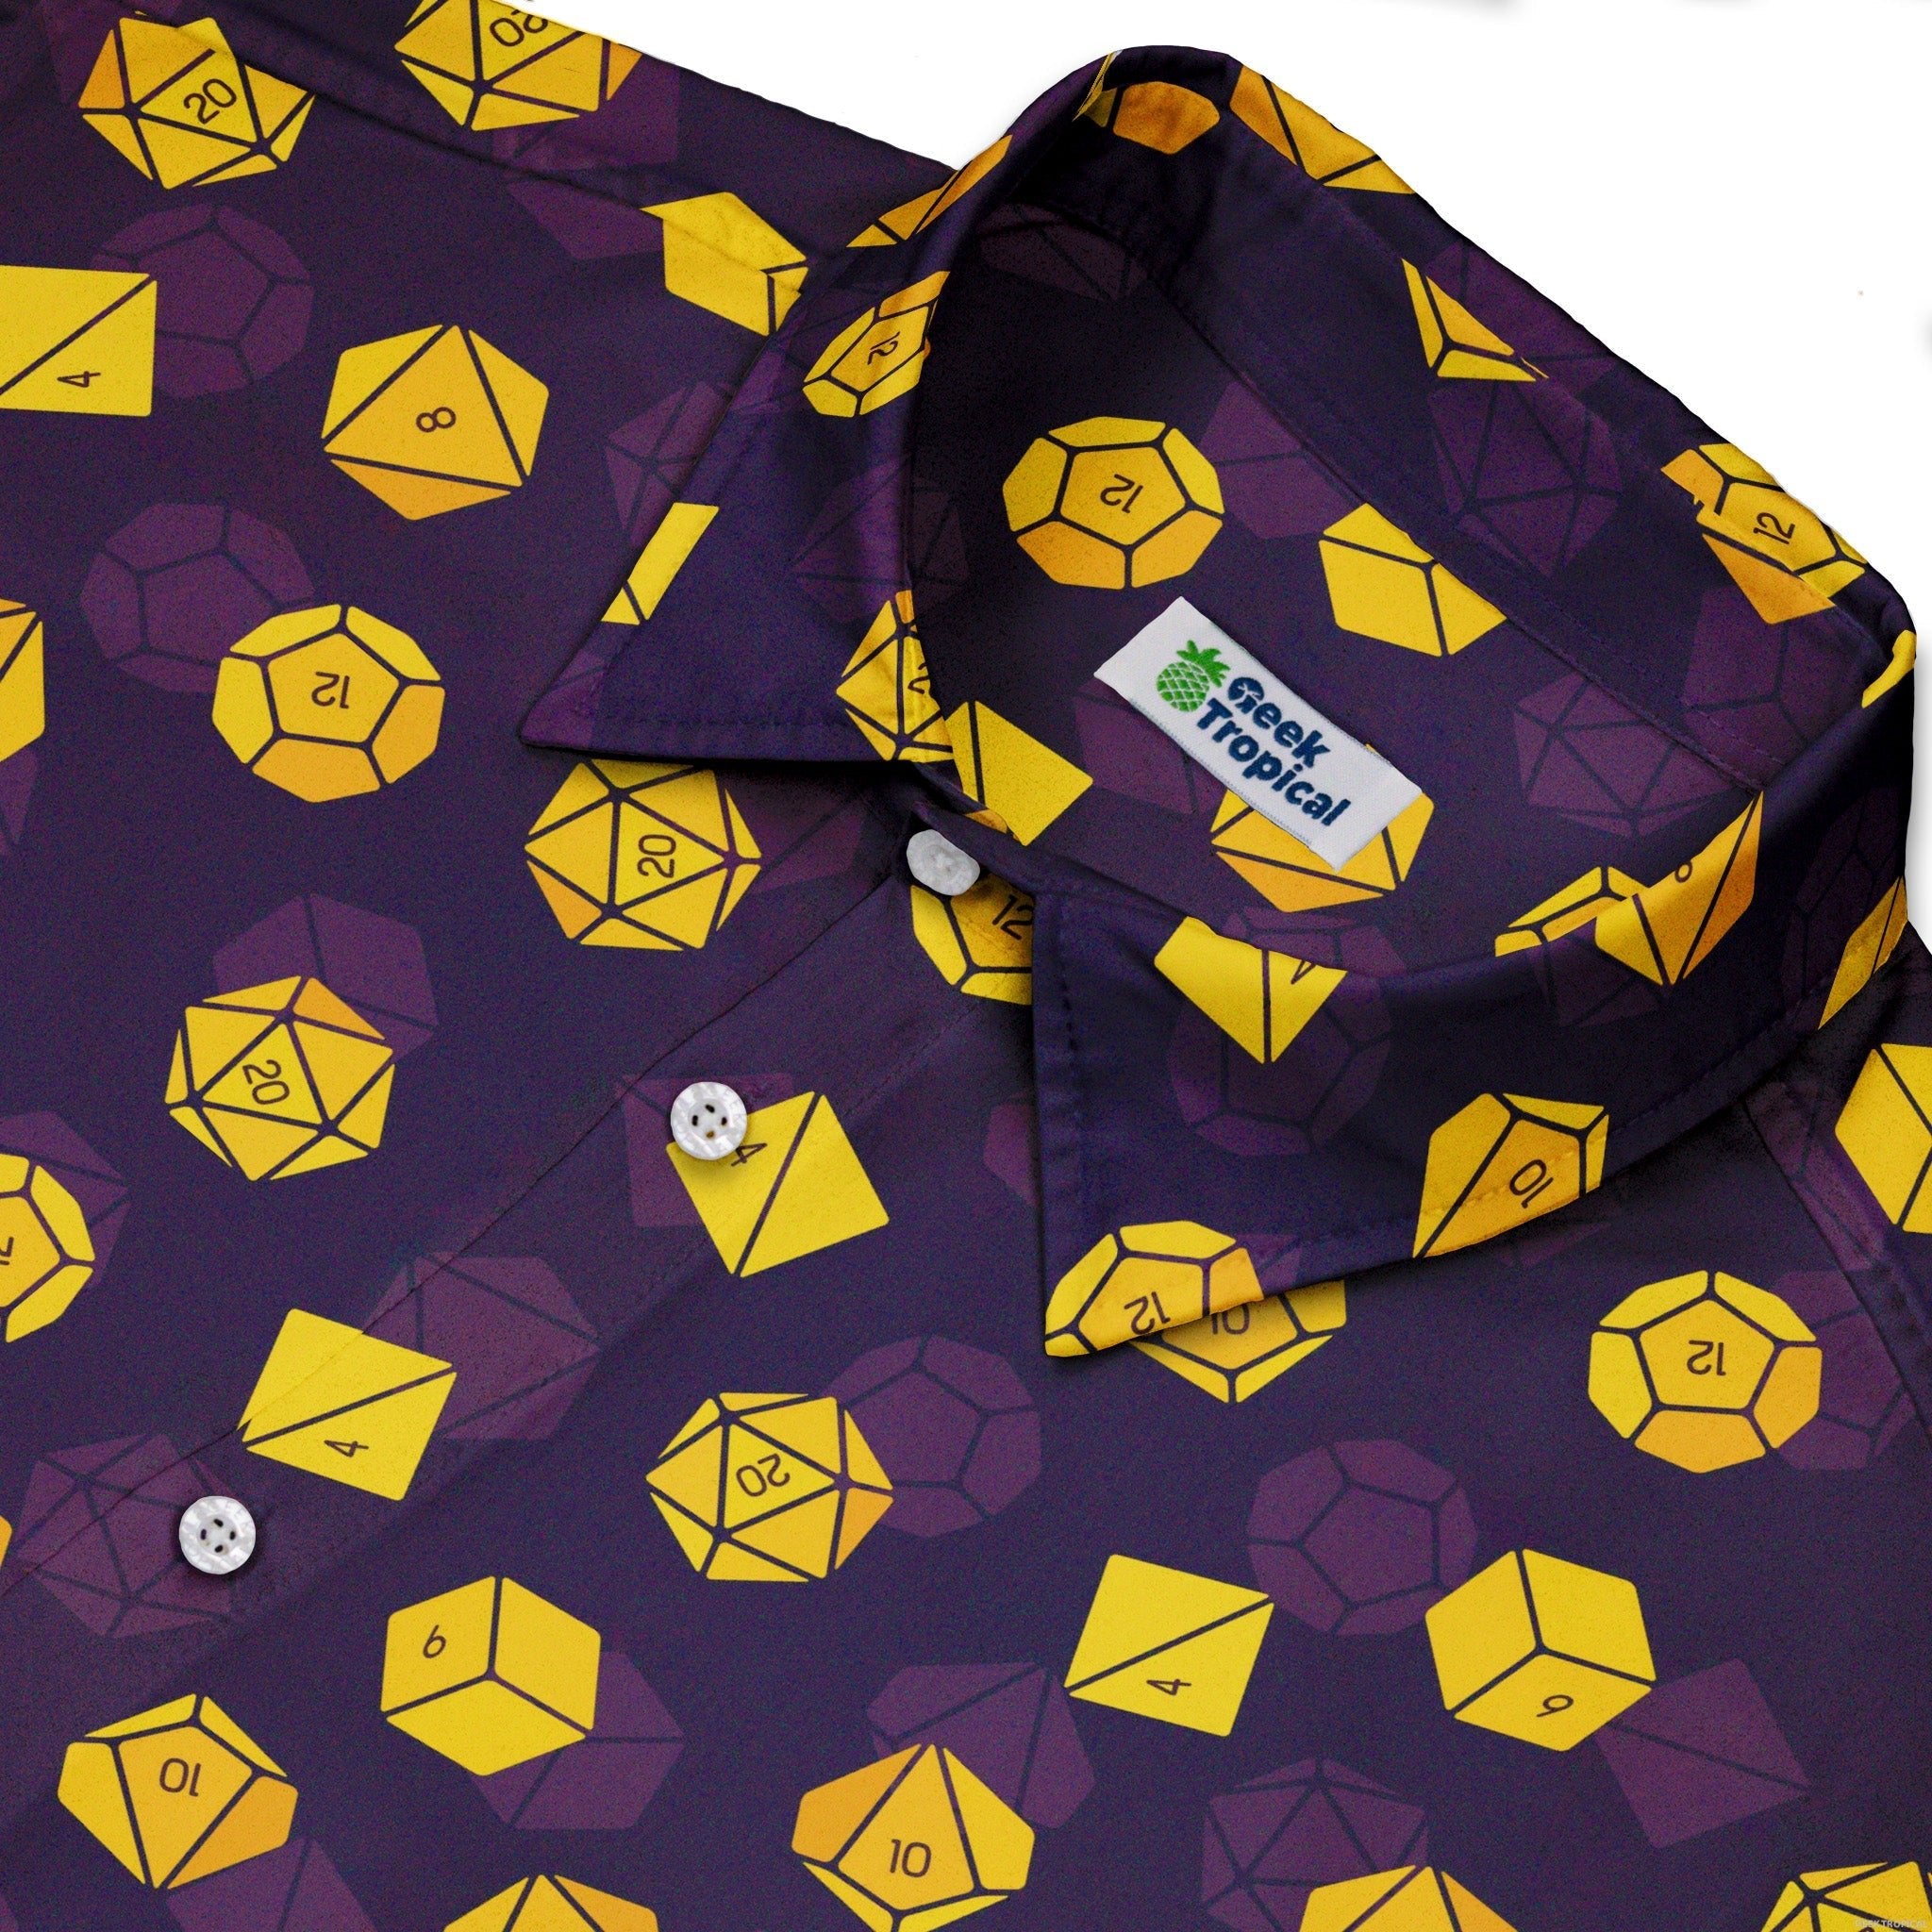 Dnd High Roller Gold Dice Button Up Shirt - adult sizing - dnd & rpg print - Simple Patterns